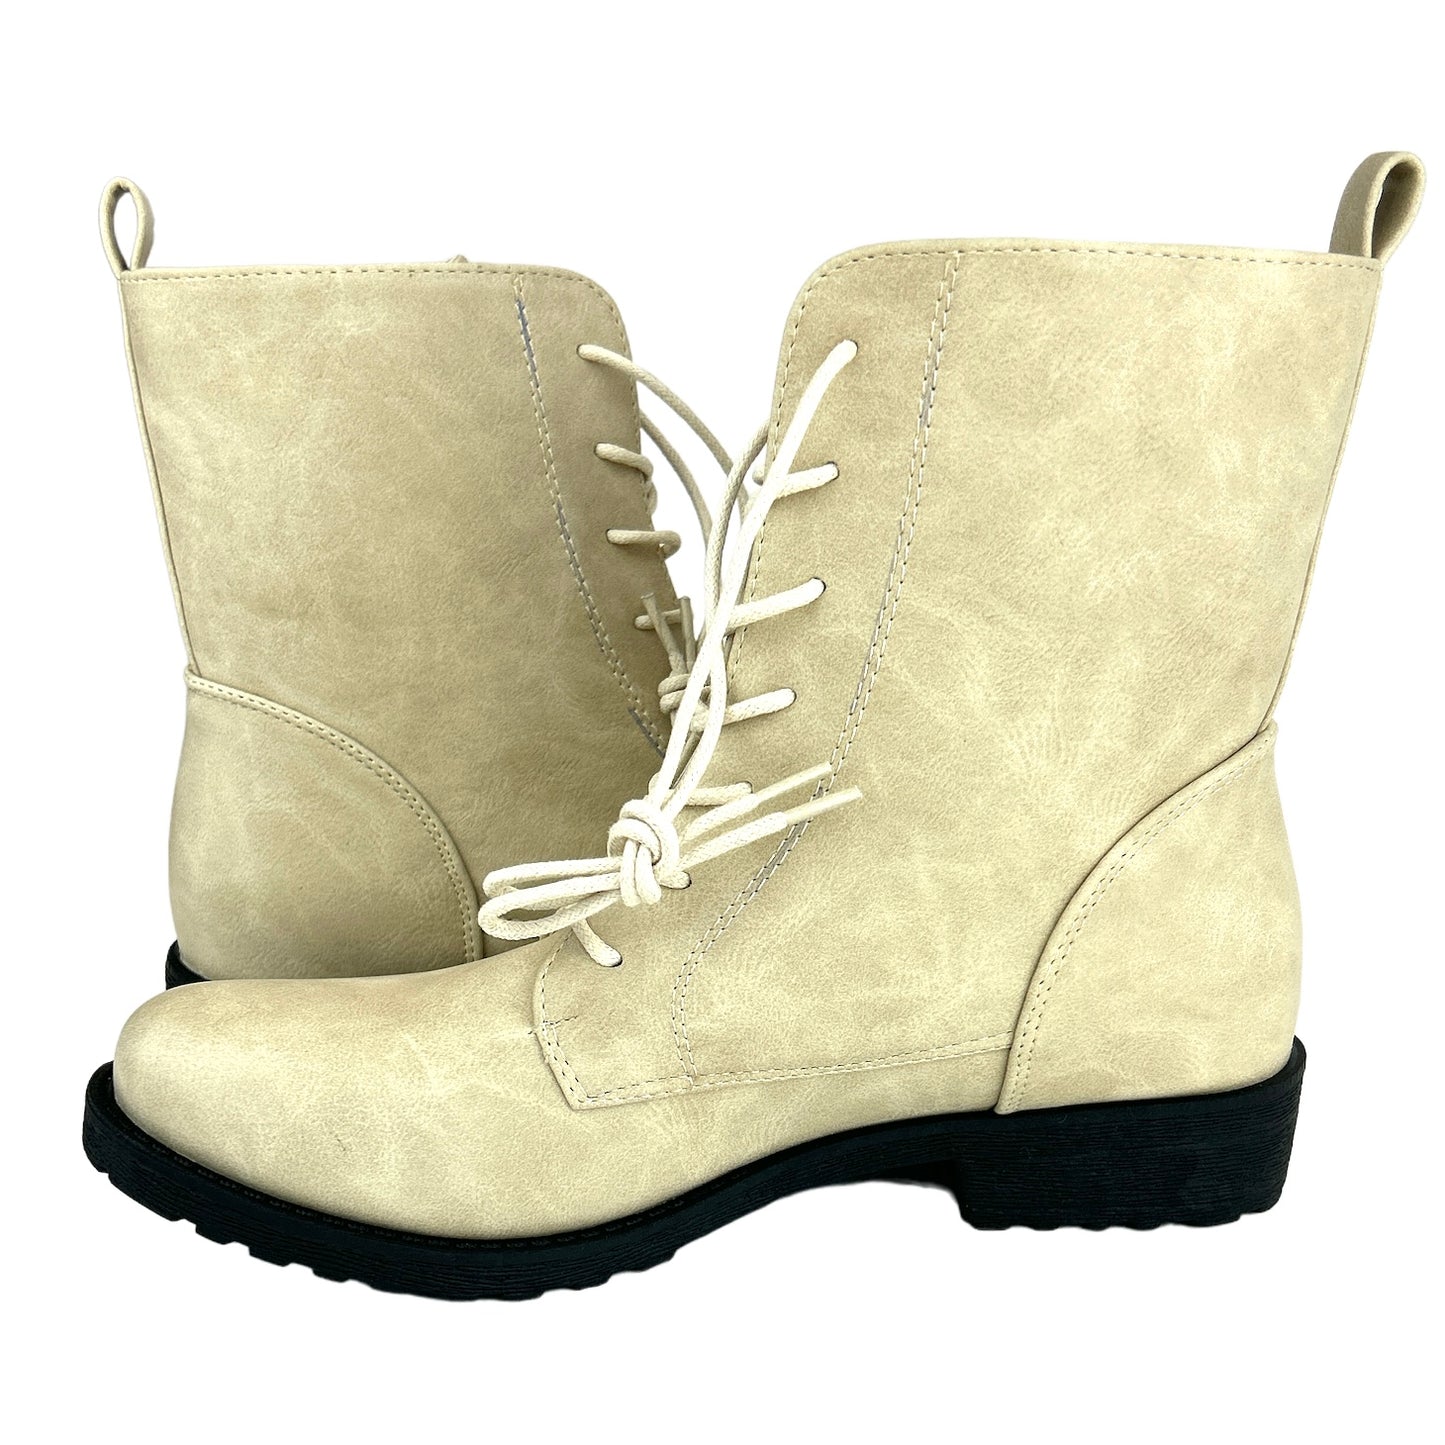 Booney Stone Lace Up Combats Women's Ankle Boots